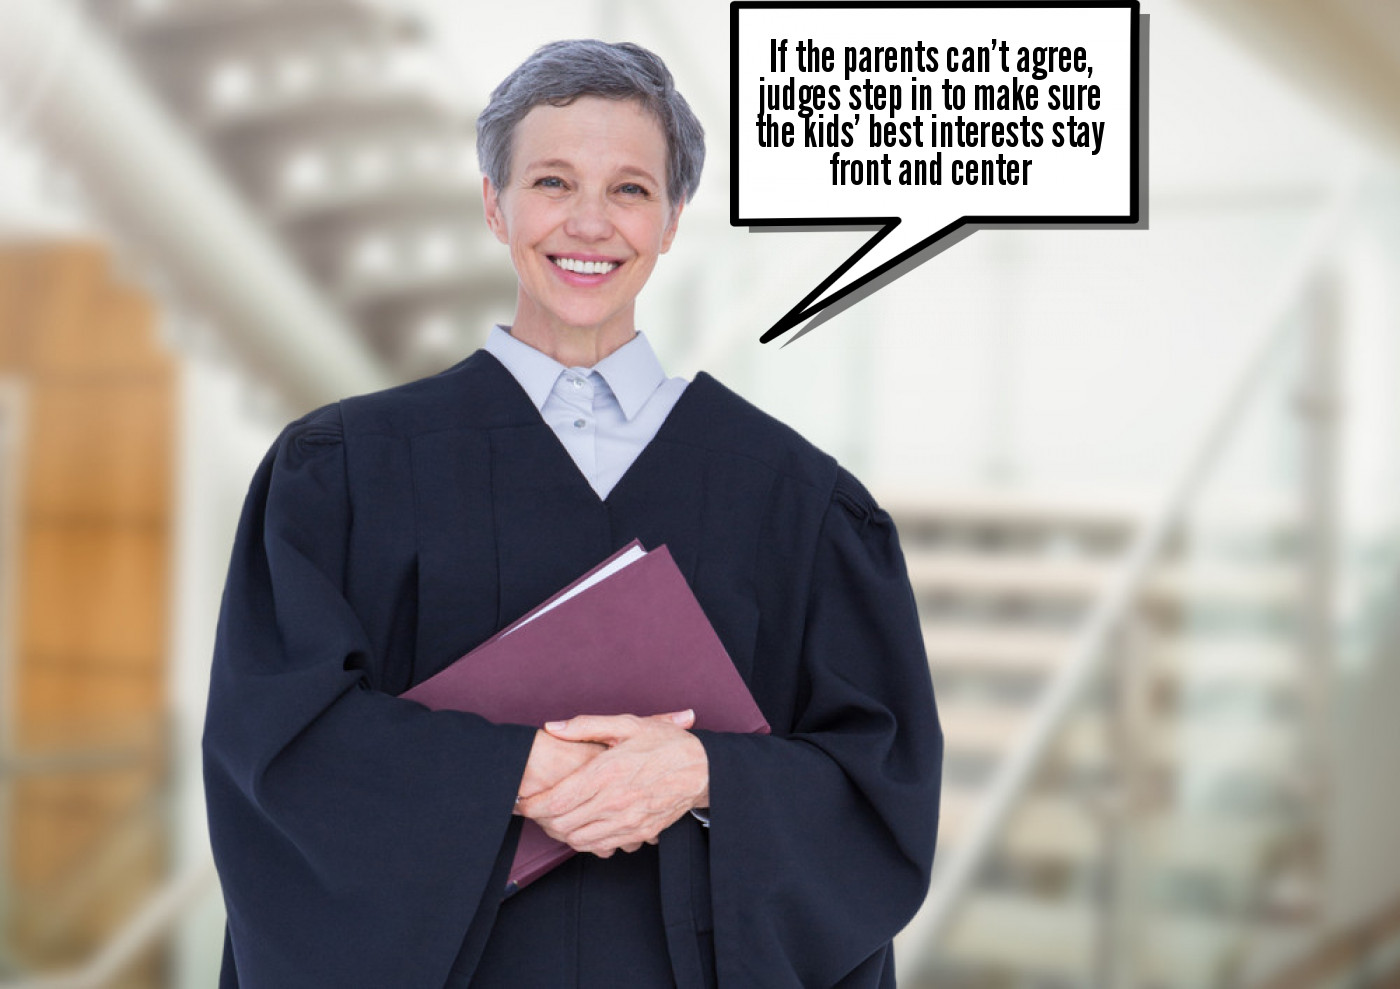 A smiling judge holding a folder with a speech bubble 